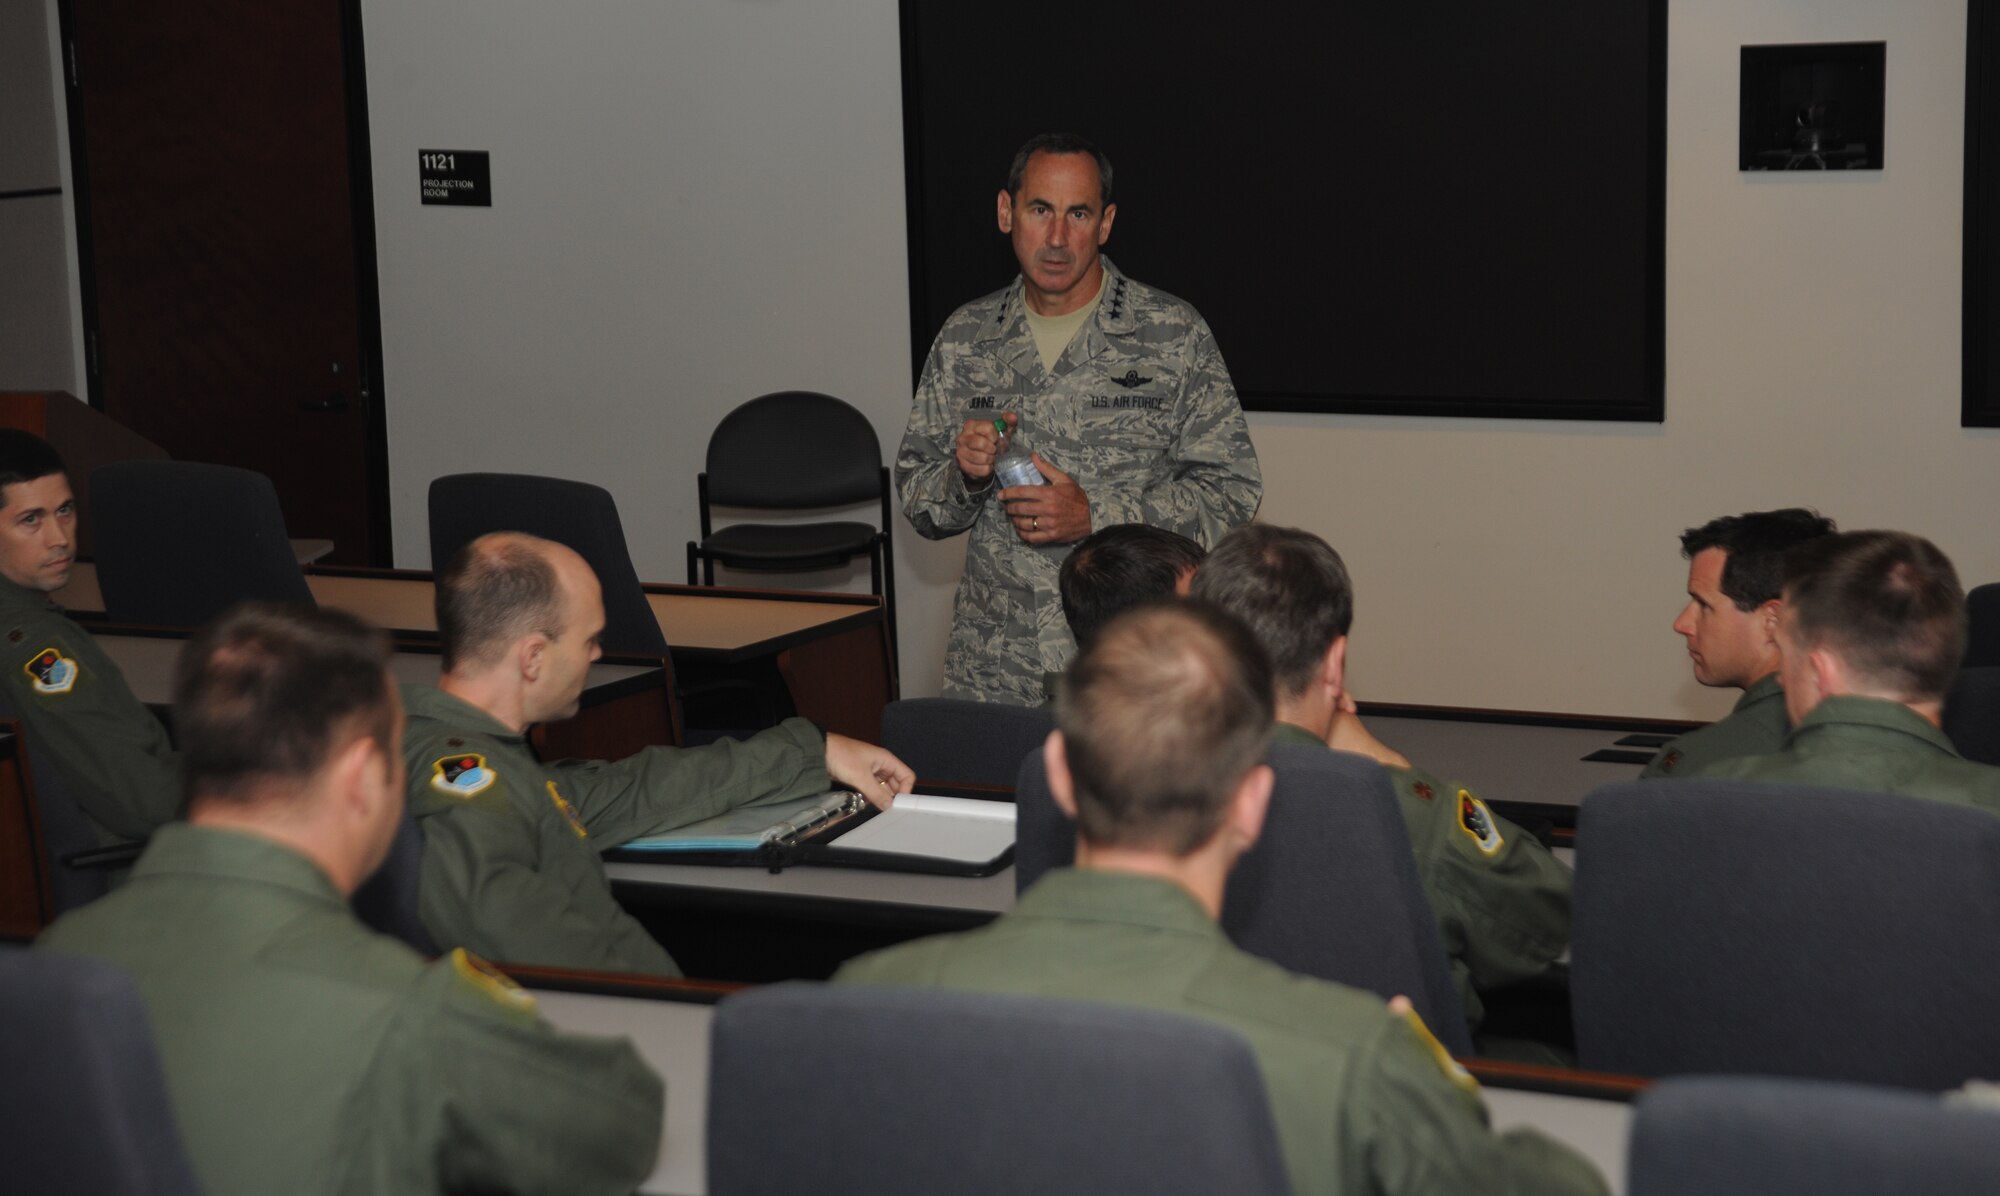 Gen. Raymond Johns, Air Mobility Command commander, addresses students from the Mobility Operations School's Advanced Study of Air Mobility program June 1 at the U.S. Air Force Expeditionary Center. The General addressed the role of the Air Force across warfighting domains as well as interacting with students on their graduate research. ASAM is a 13 month Intermediate Developmental Education and graduate program delivered by the EC. (Photo by Staff Sgt. Zachary Wilson)
